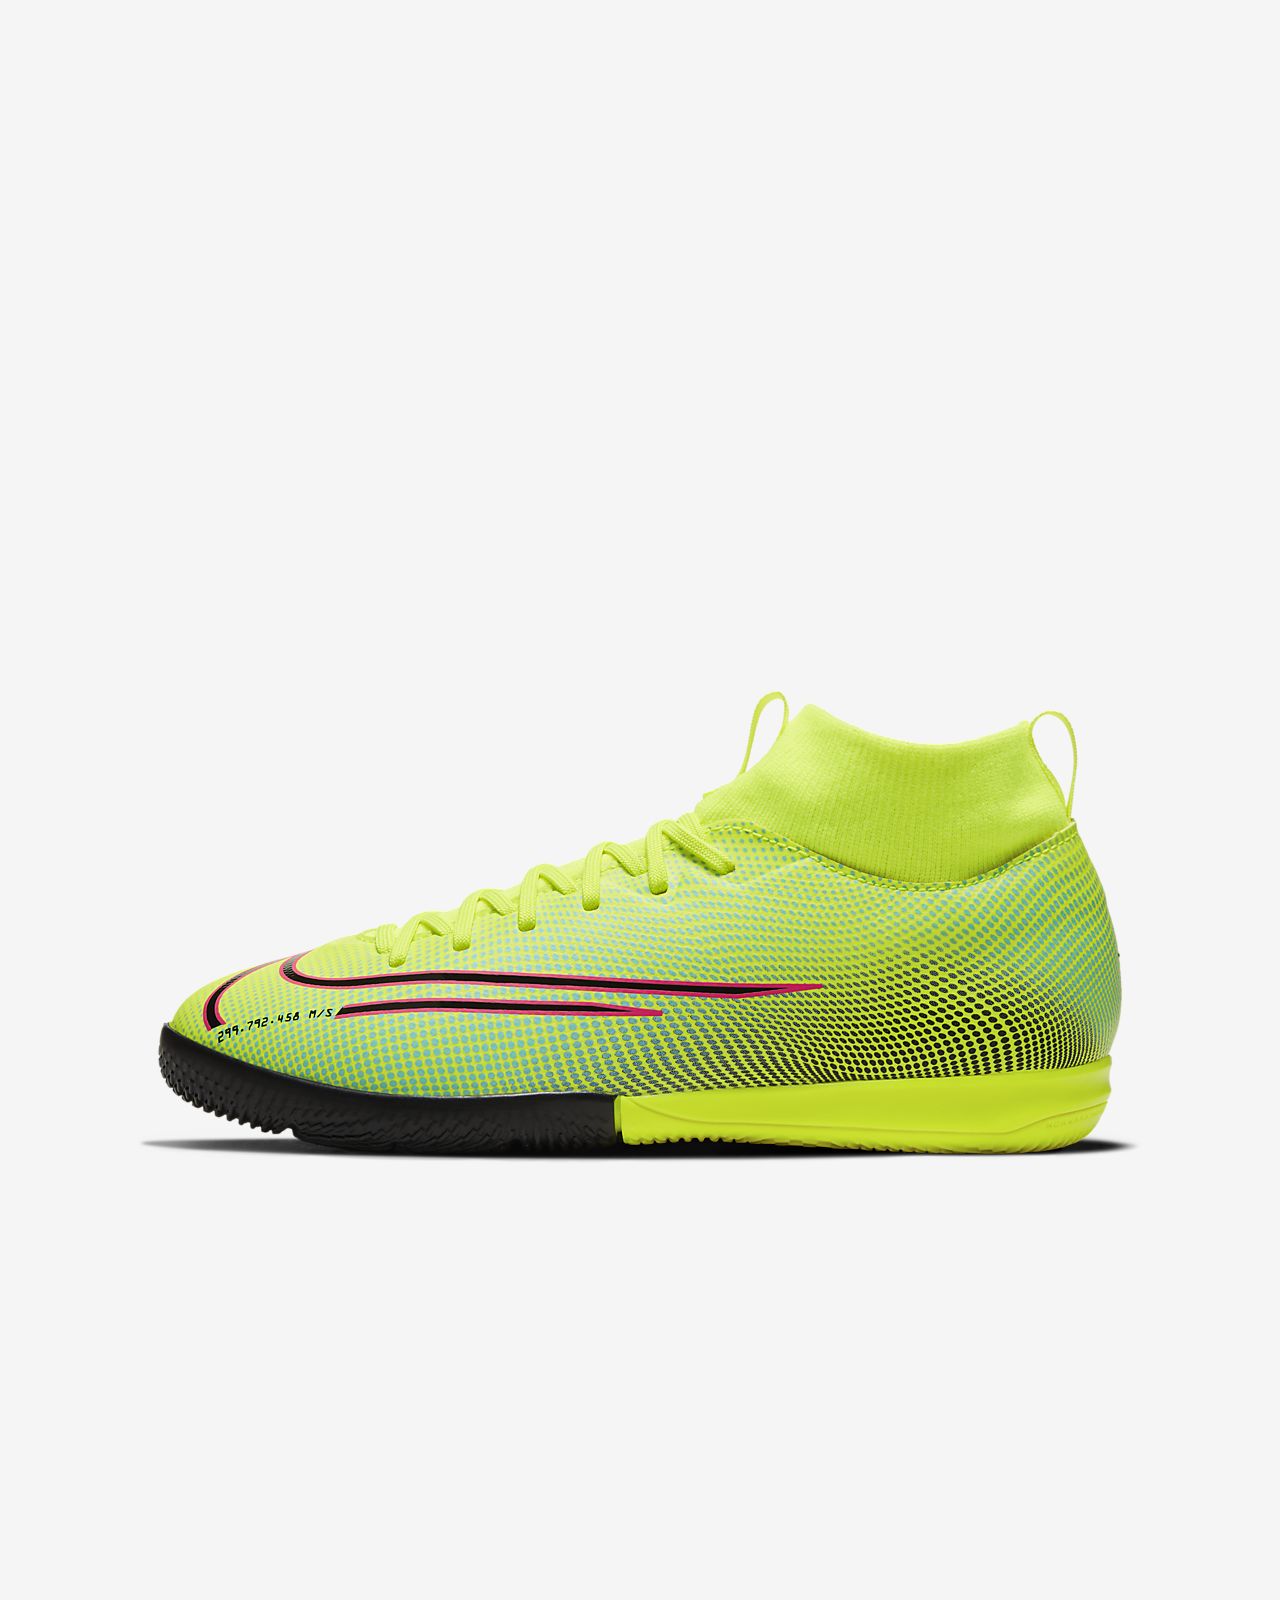 Nike Mercurial Superfly VII Academy Pro AC MDS SG Blue.